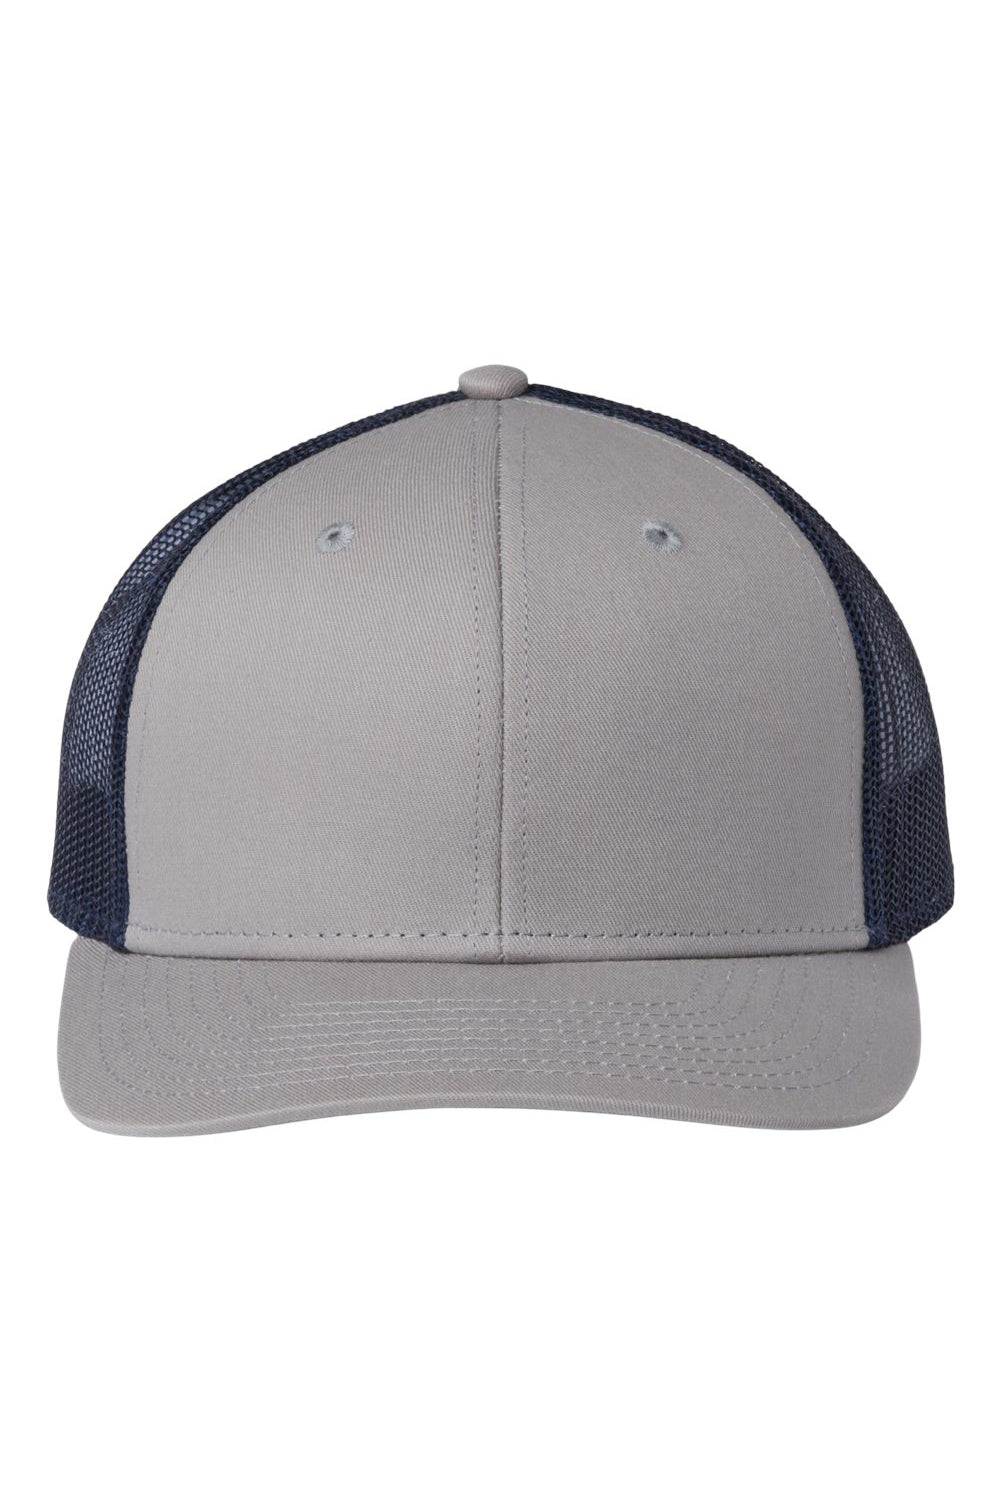 The Game GB452E Mens Everyday Trucker Hat Grey/Navy Blue Flat Front